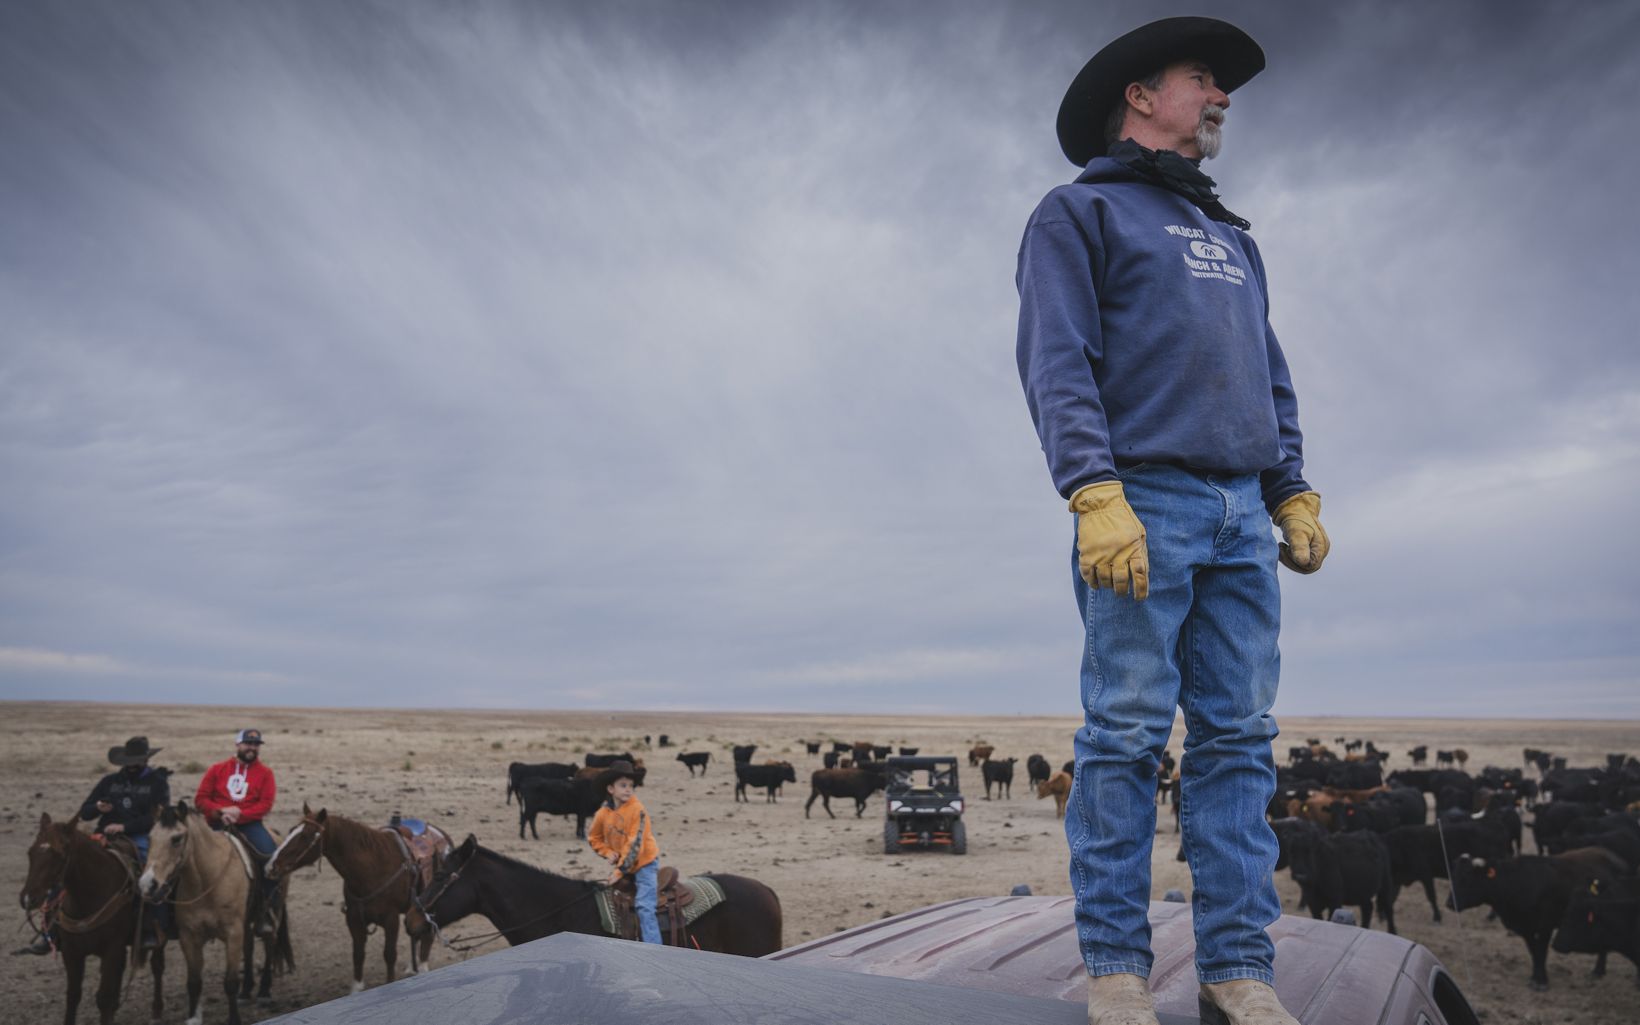 Scanning the Ranch  Treg Hatcher gains a little height in order to see farther across the prairie.  © Morgan Heim 